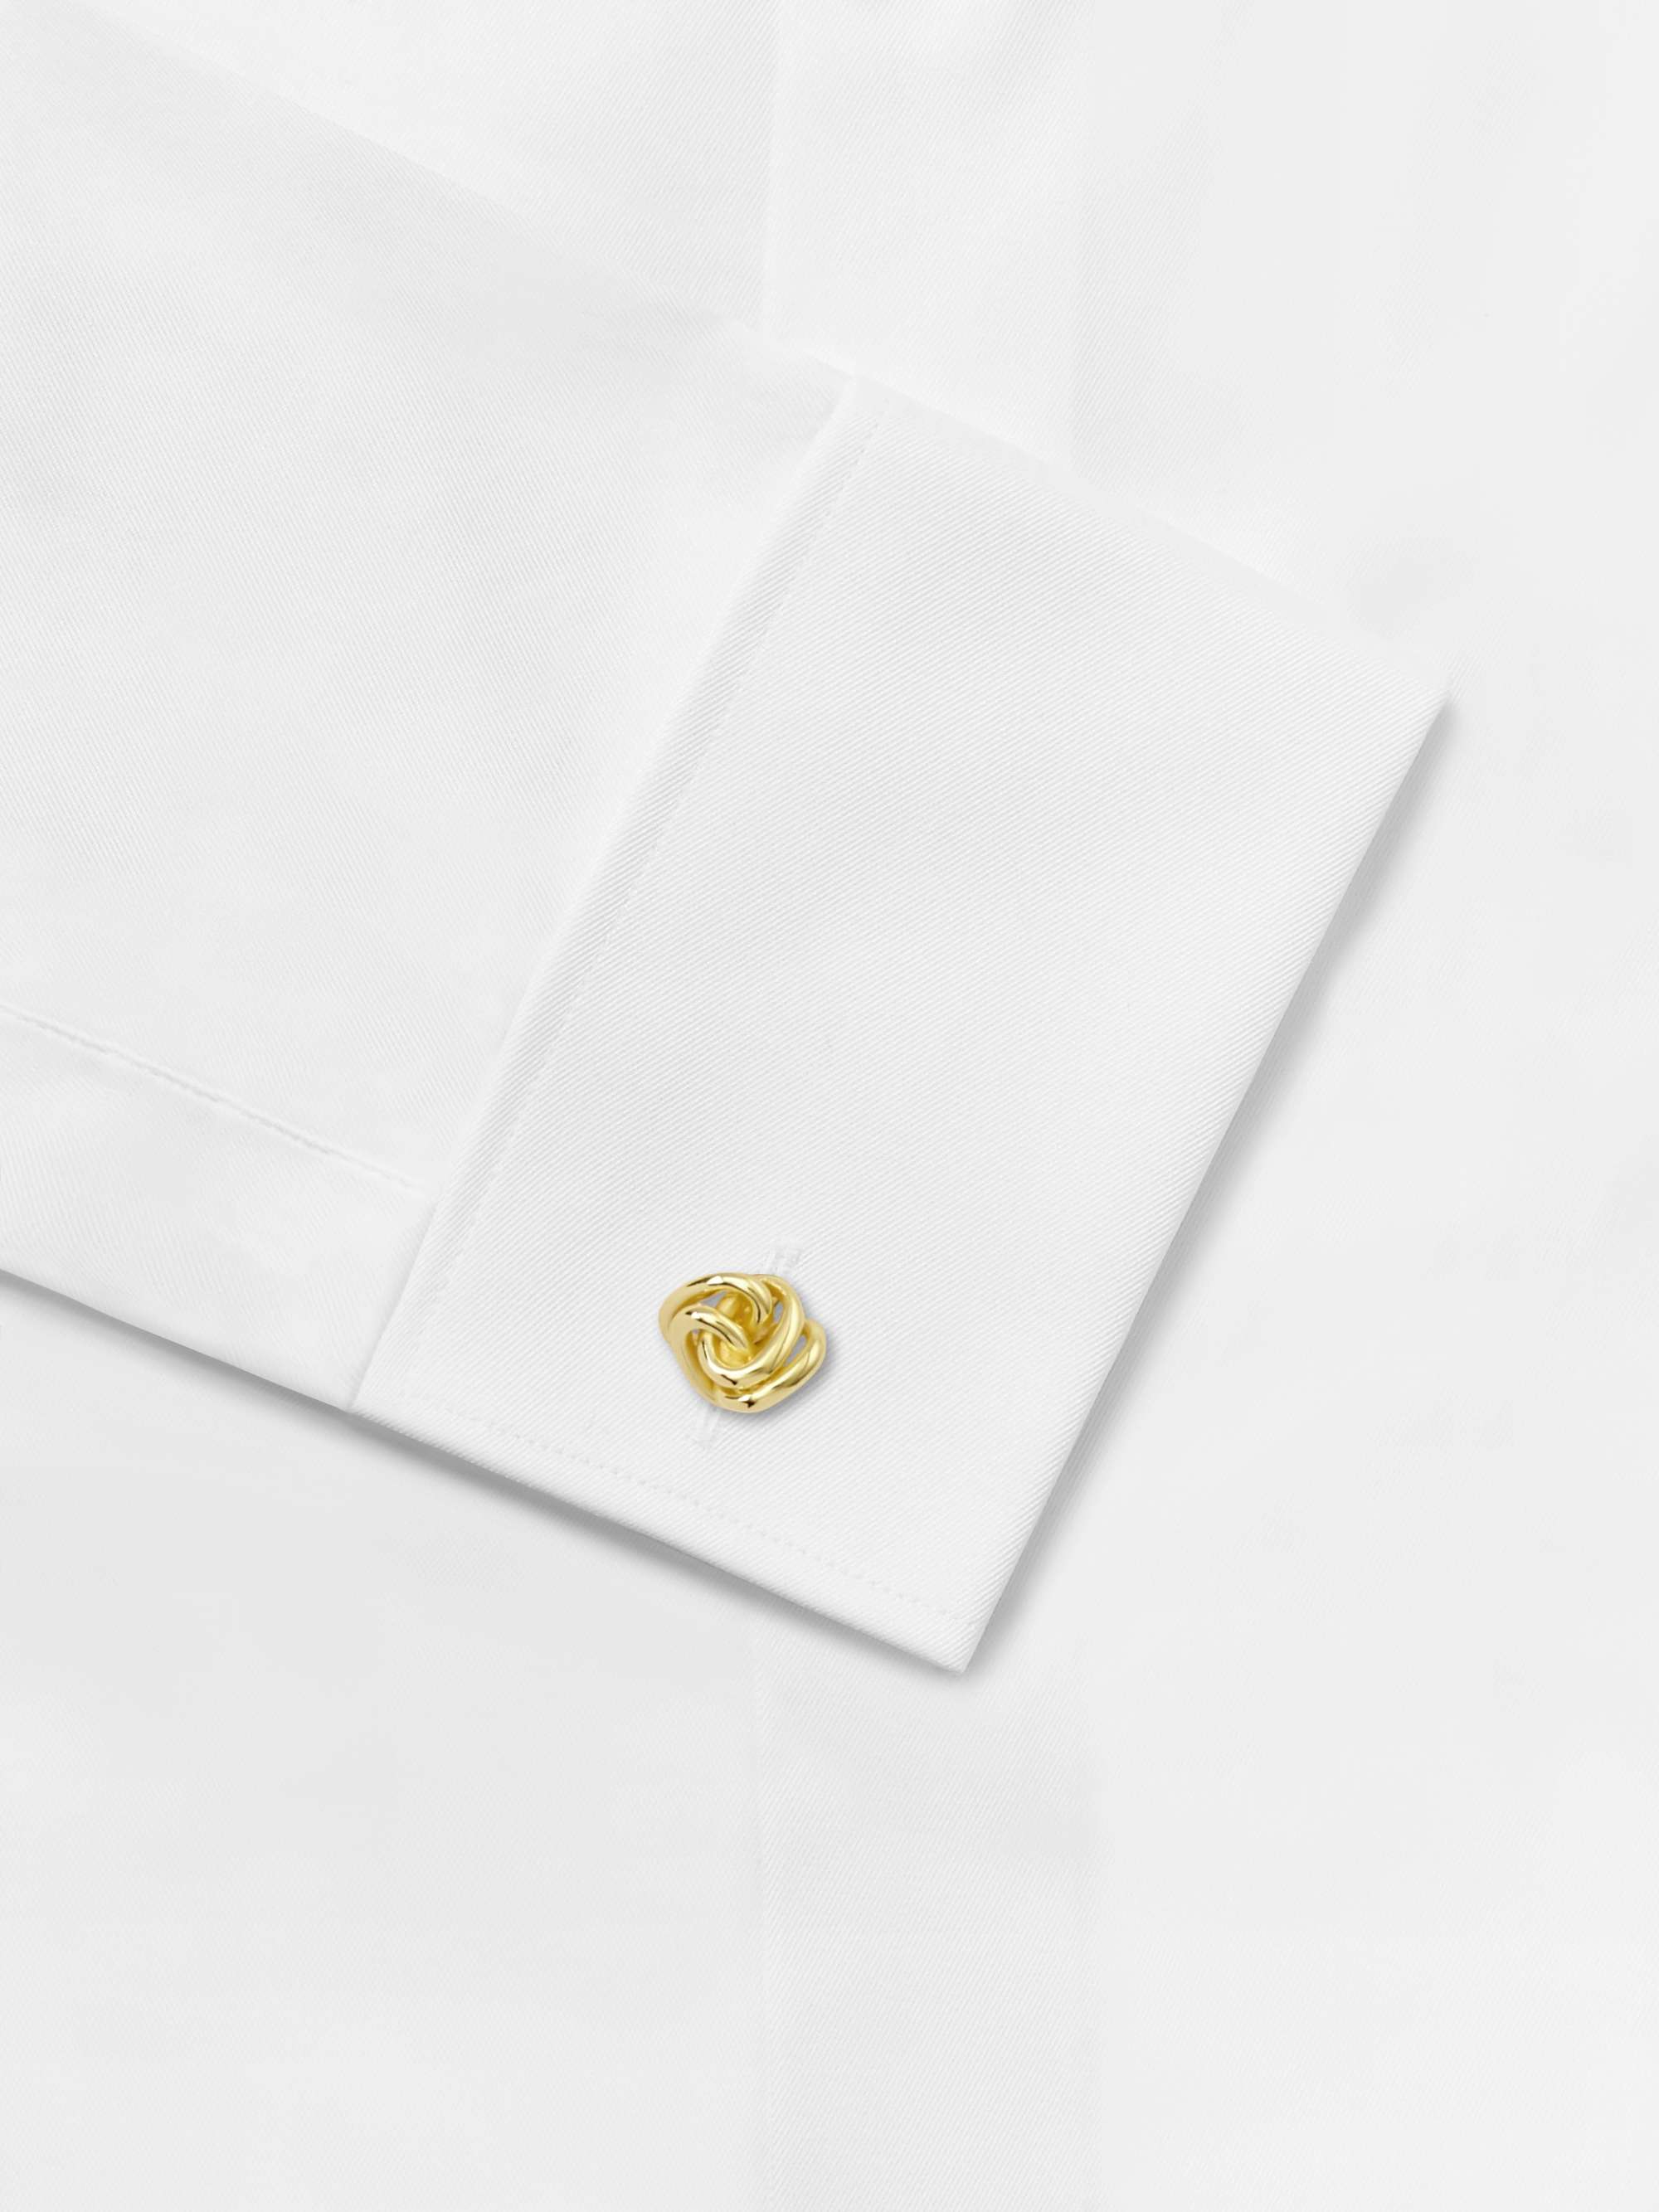 LANVIN Knotted Gold-Plated Cufflinks